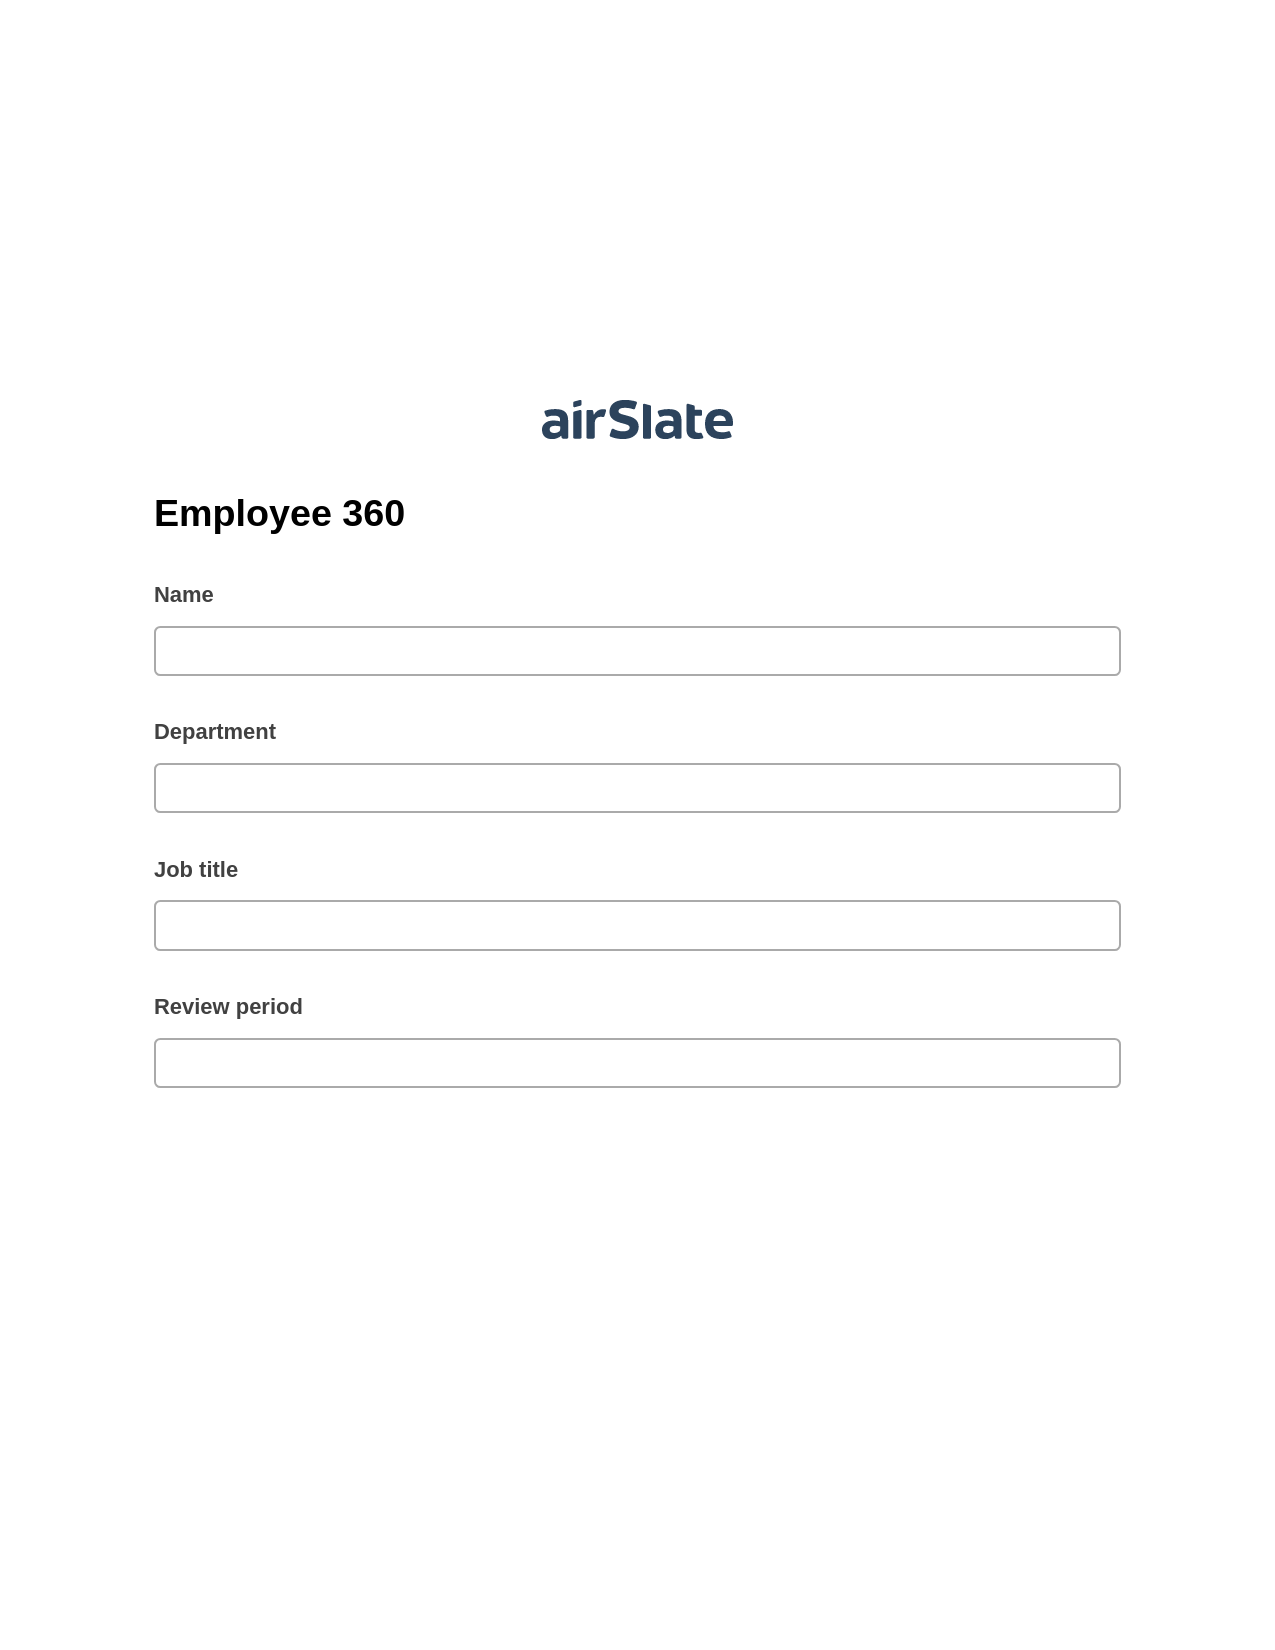 Employee 360 Pre-fill from Office 365 Excel Bot, Invoke Salesforce Process Bot, Export to Excel 365 Bot